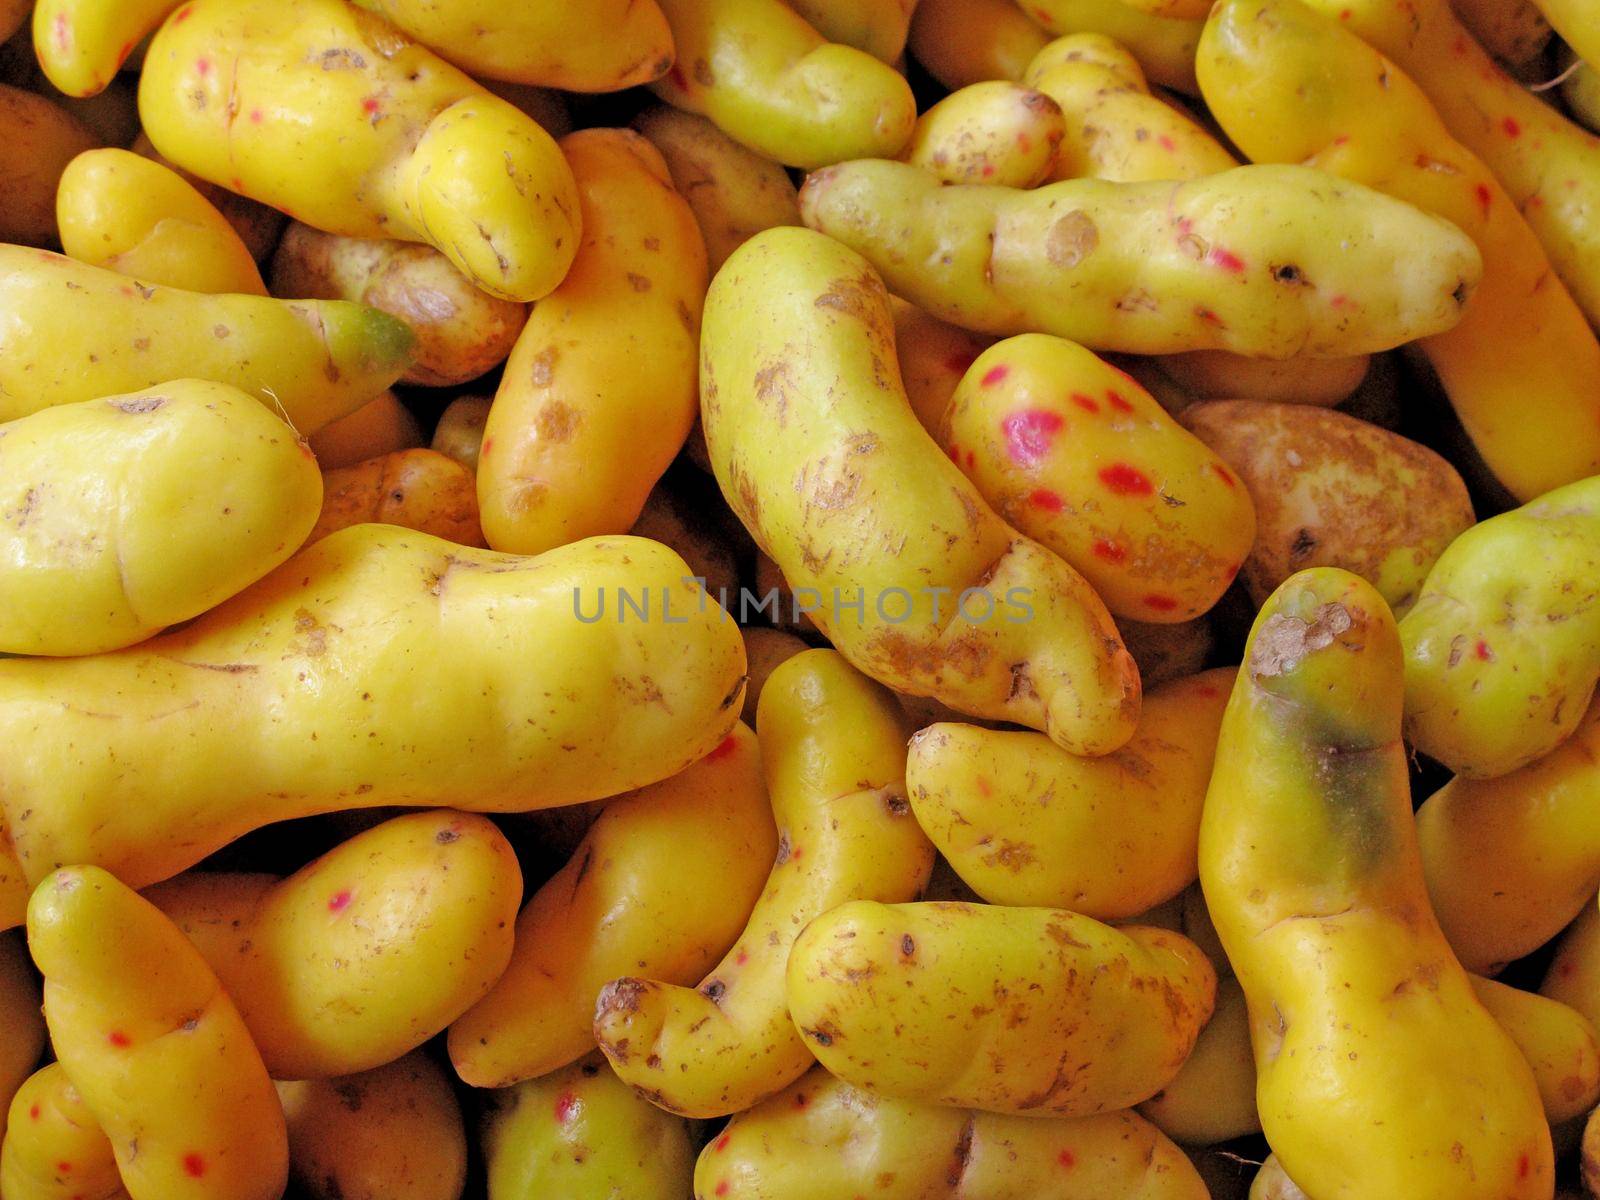 Olluquito background. Peruvian tuber by aroas